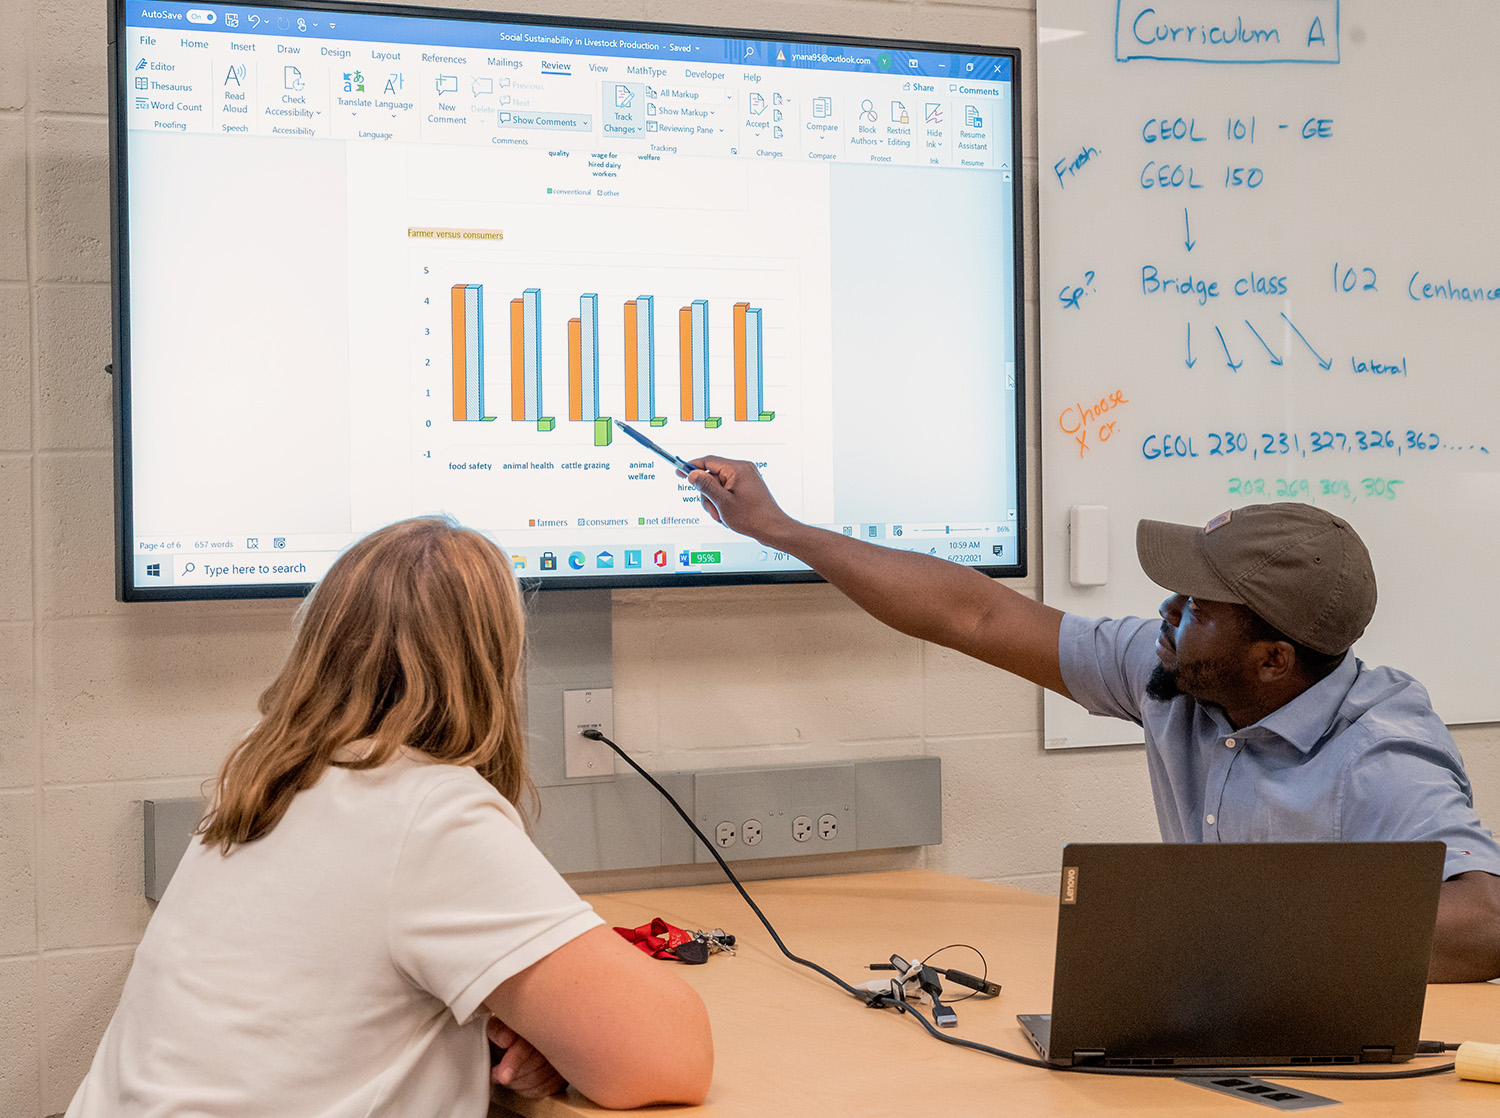 A professor points to a bar graph on a computer monitor